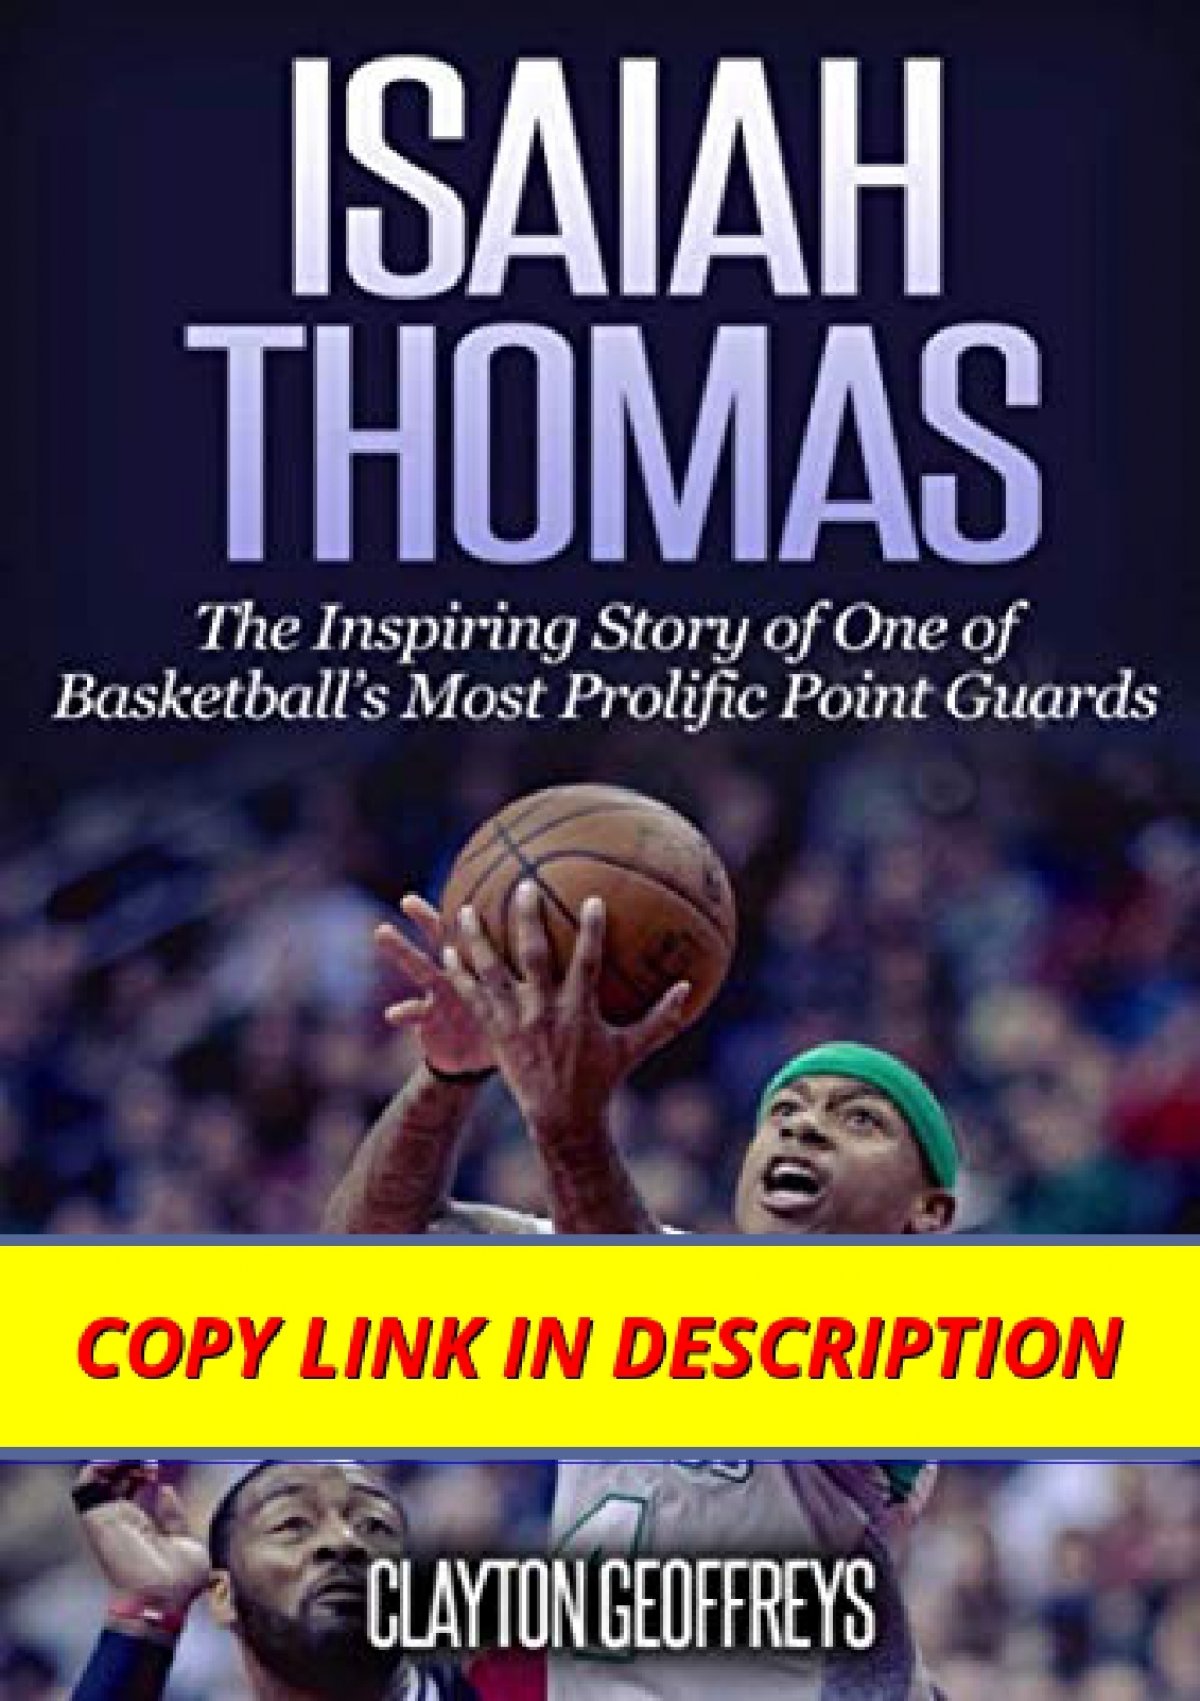 Isaiah Thomas: The Inspiring Story of One of Basketball's Most